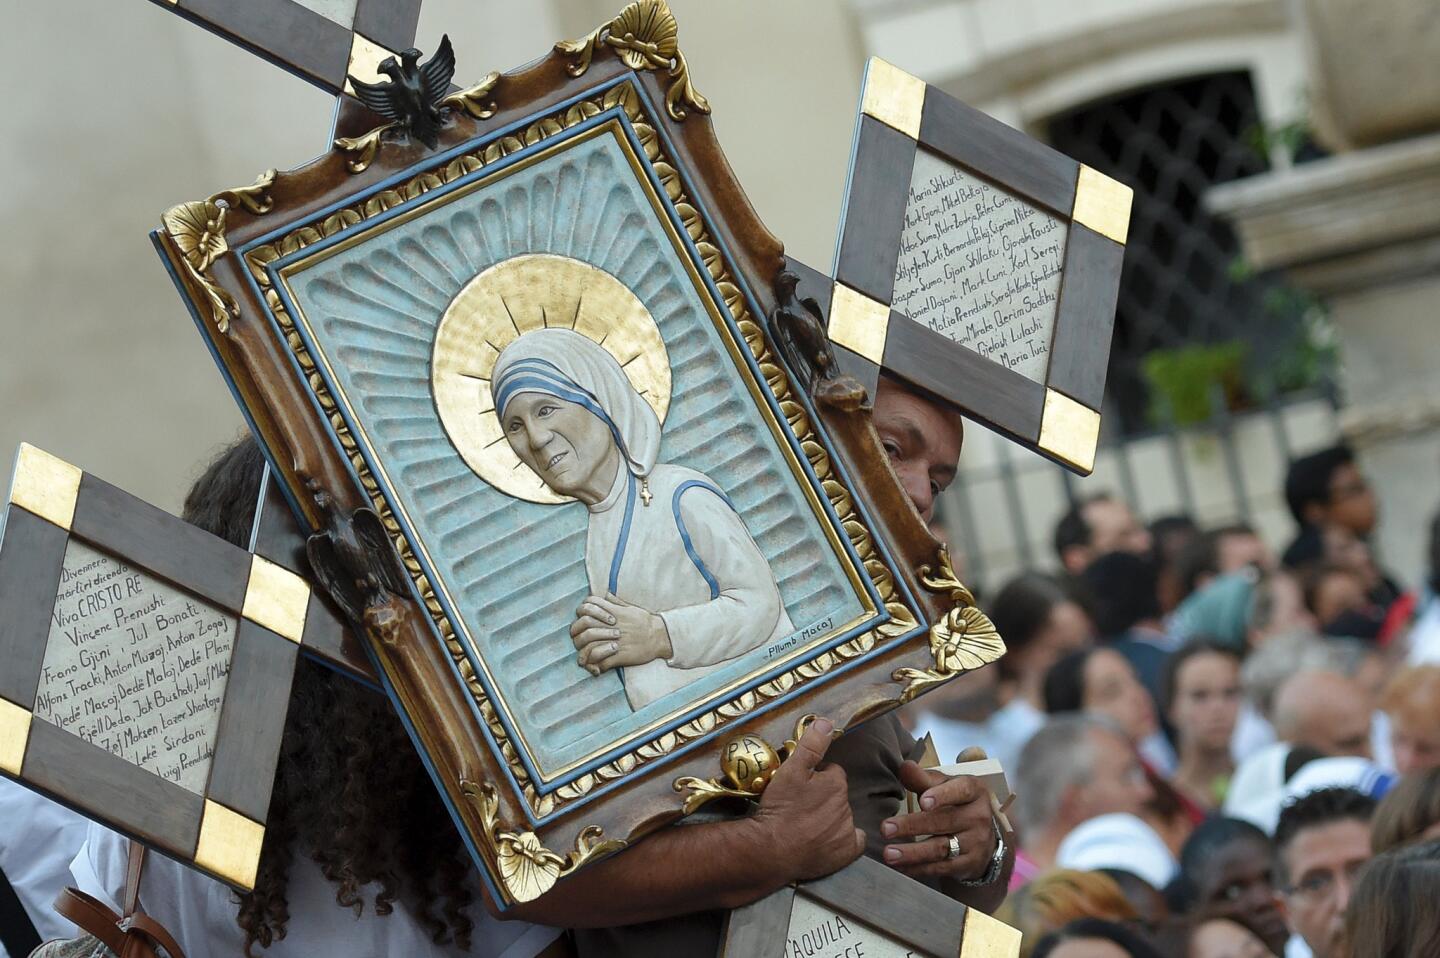 A man holds an icon of Mother Teresa of Kolkata as he arrives for the canonization in the Vatican.